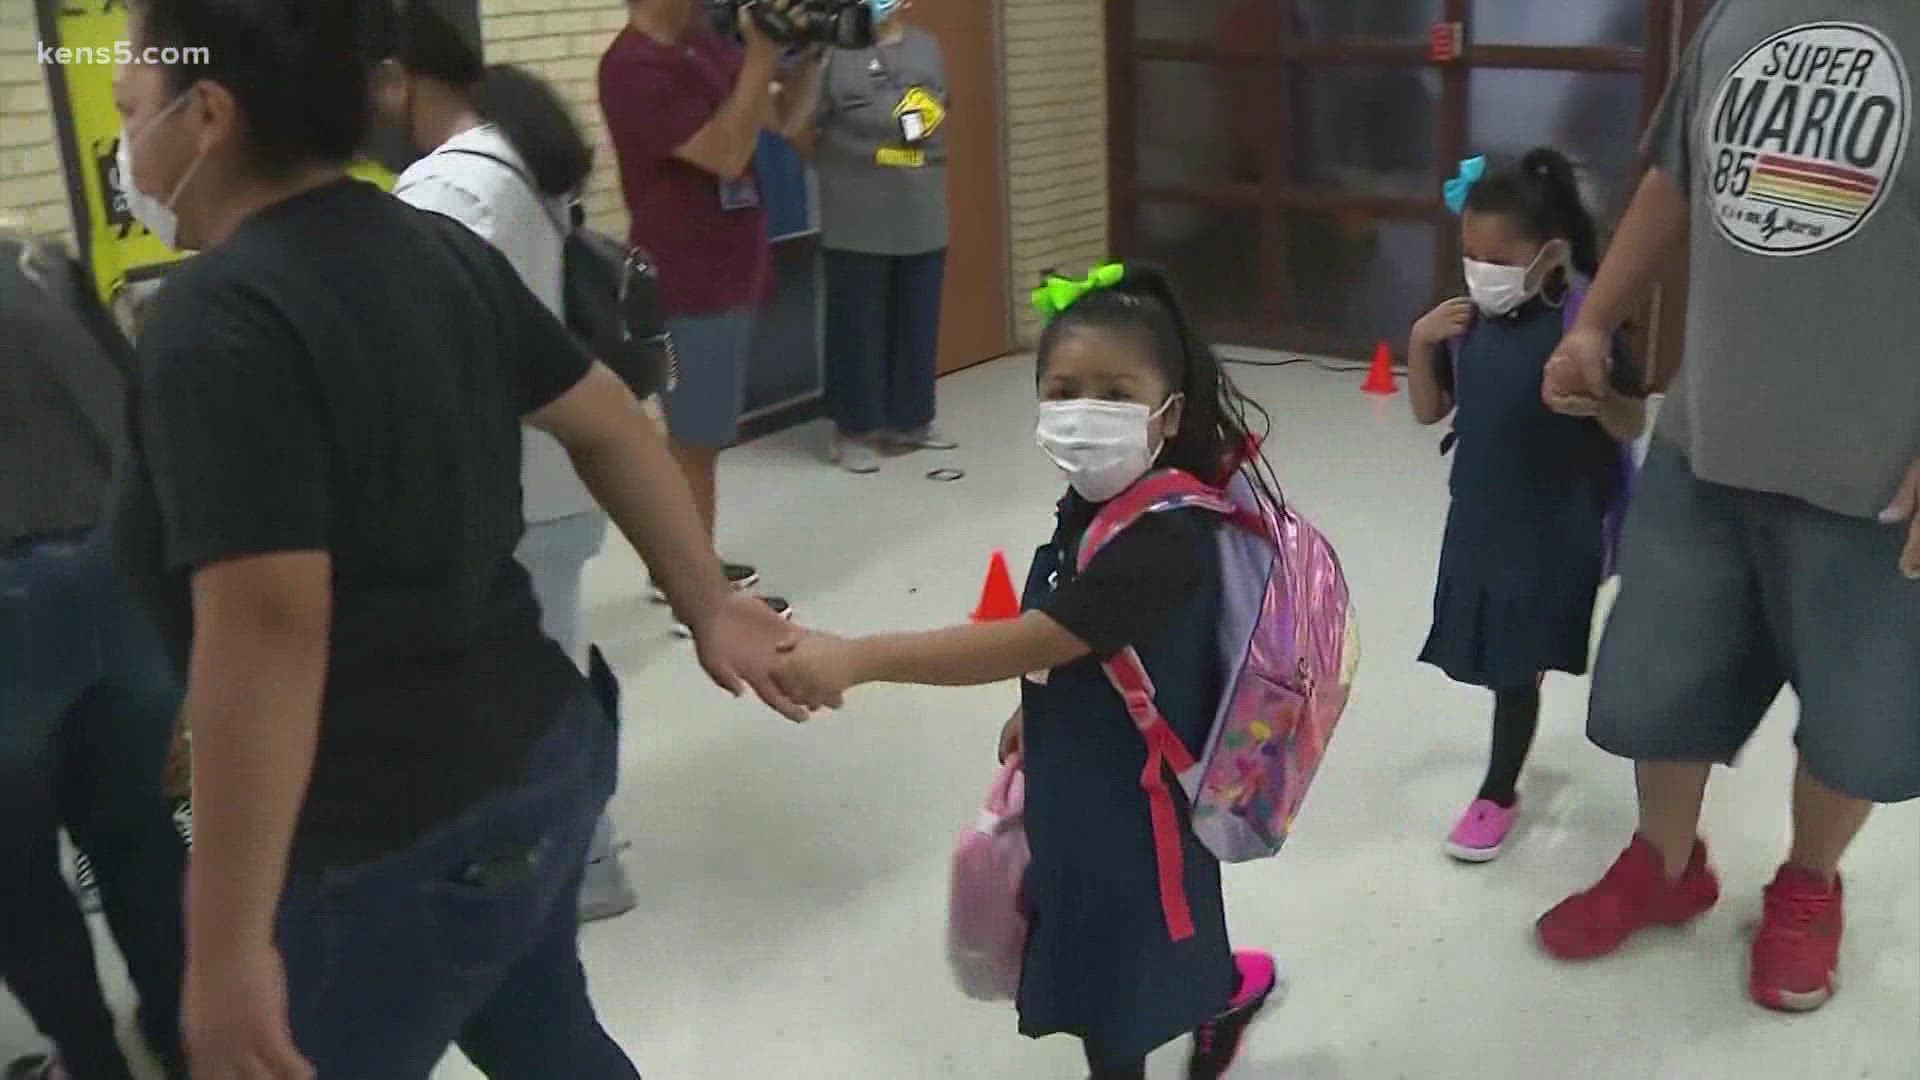 Wednesday will be the third day of the fall semester for thousands of San Antonio-area students, but the first in which masks will be required of them.